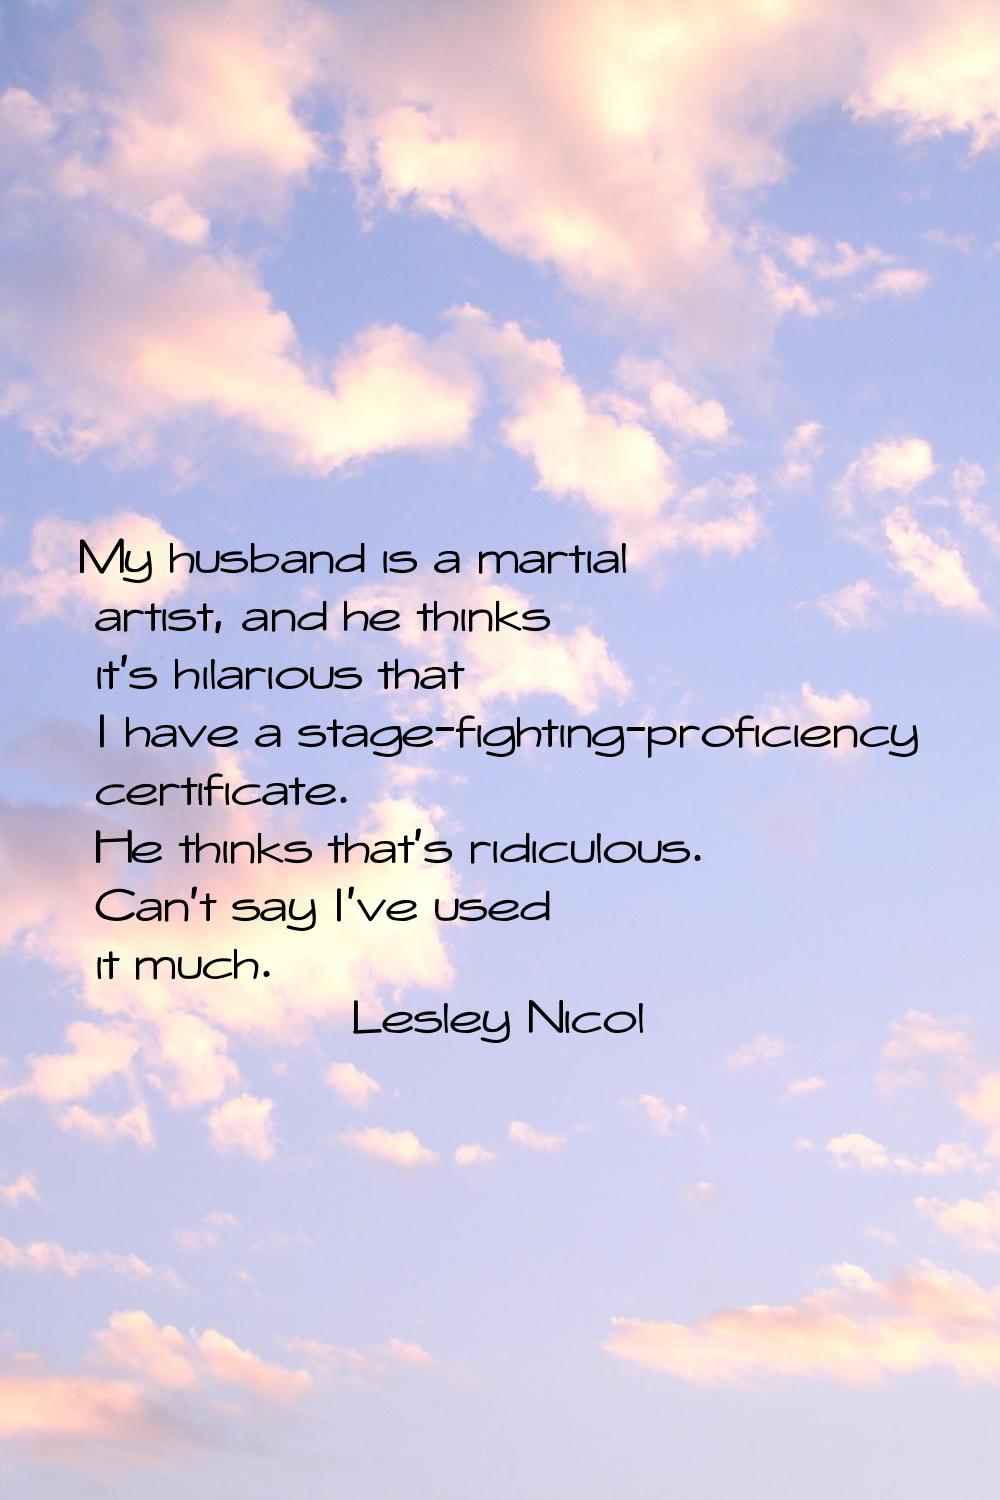 My husband is a martial artist, and he thinks it's hilarious that I have a stage-fighting-proficien